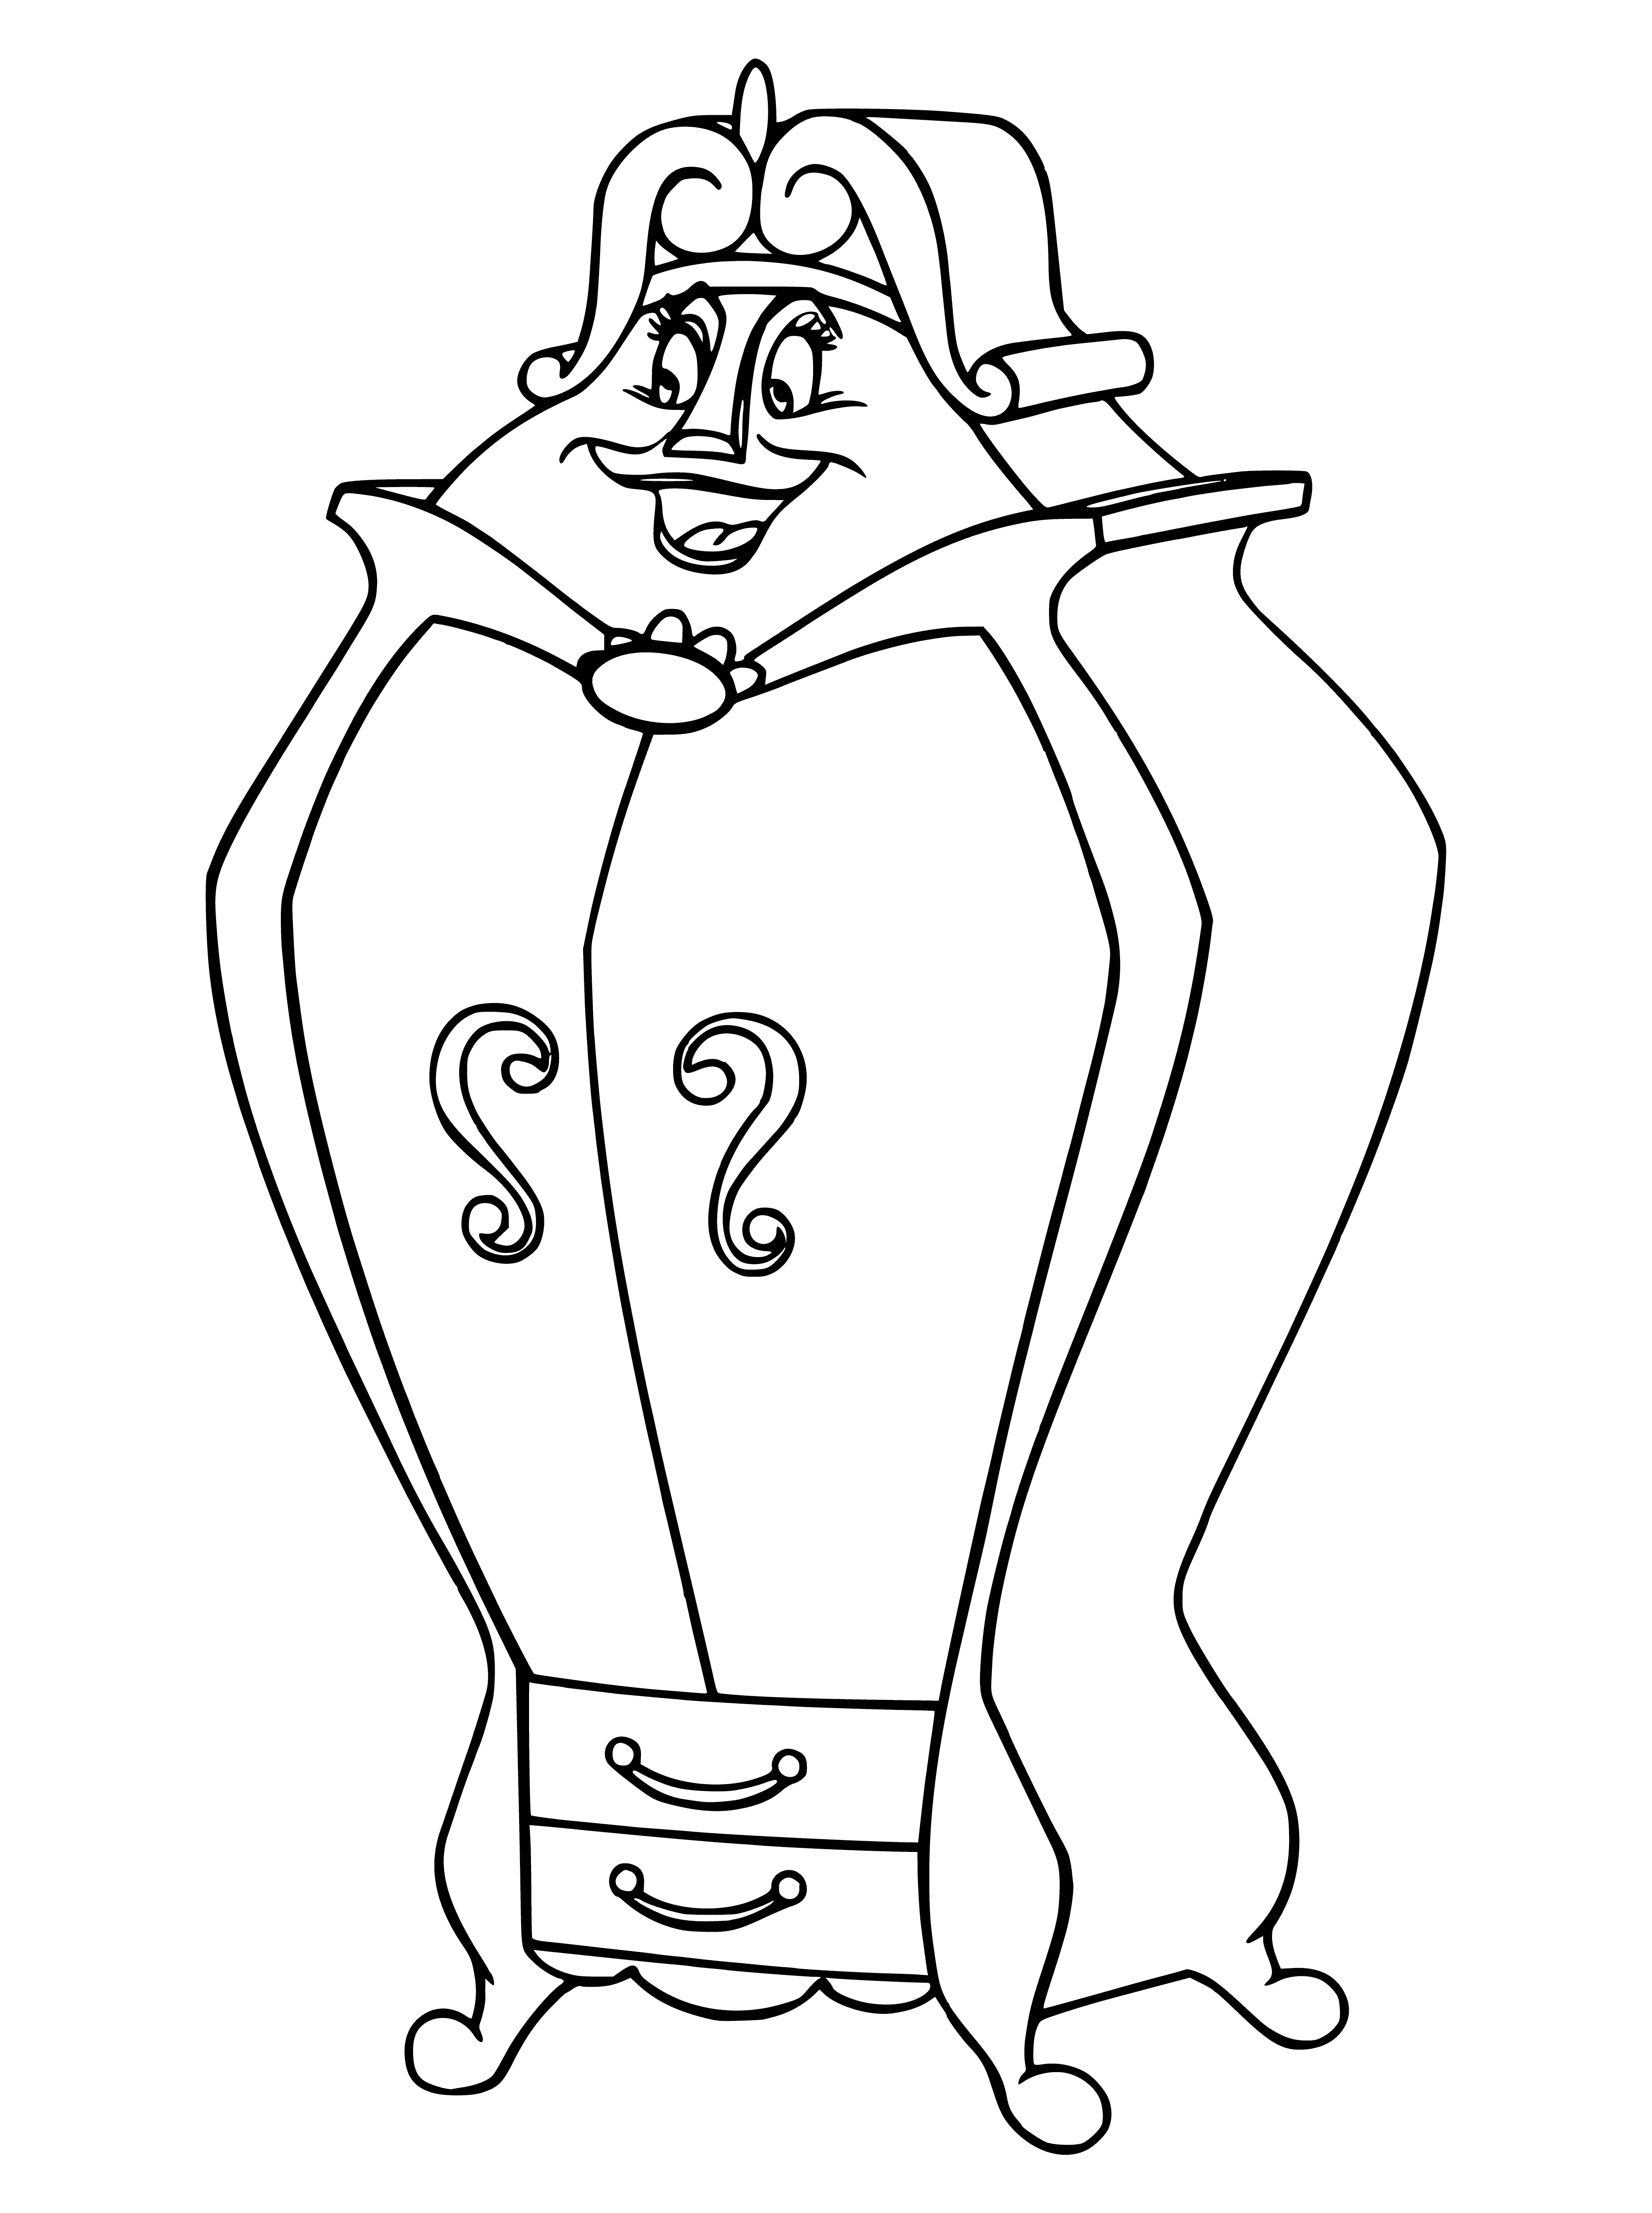 Magic Servant of the Castle coloring page